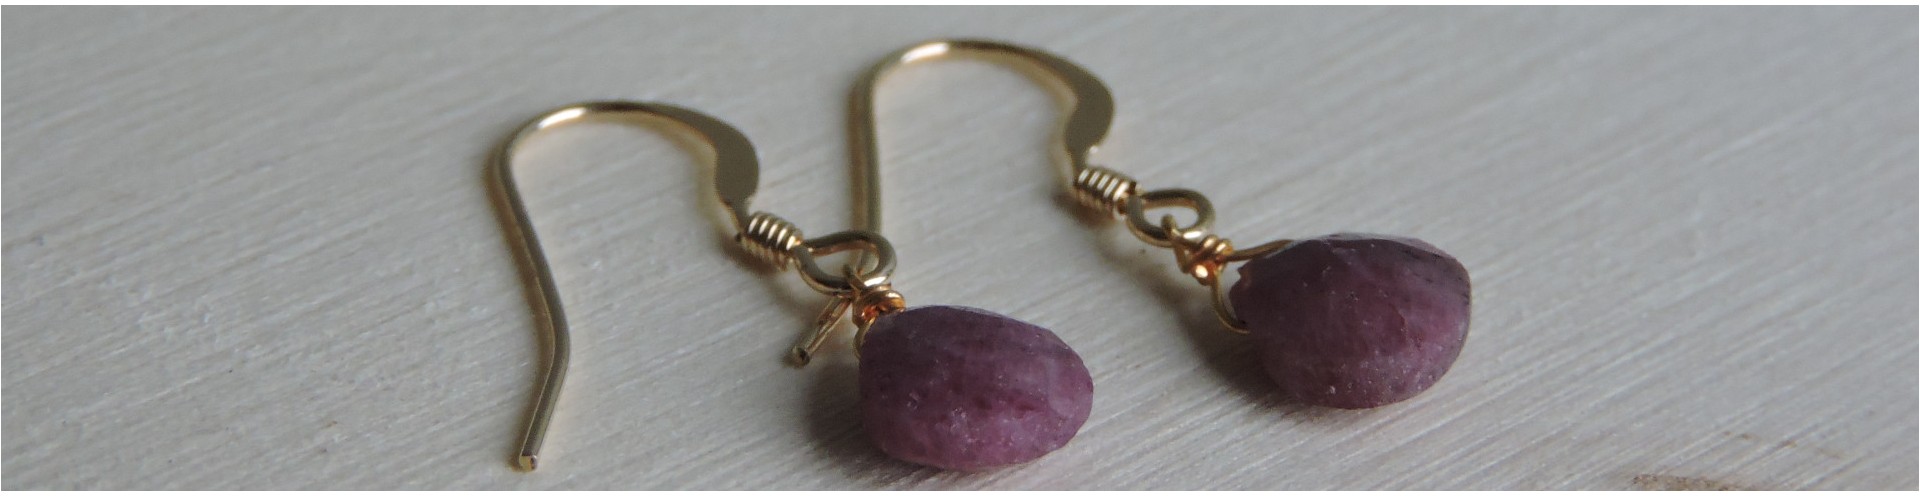 Gold or silver plated earrings, semi precious stones